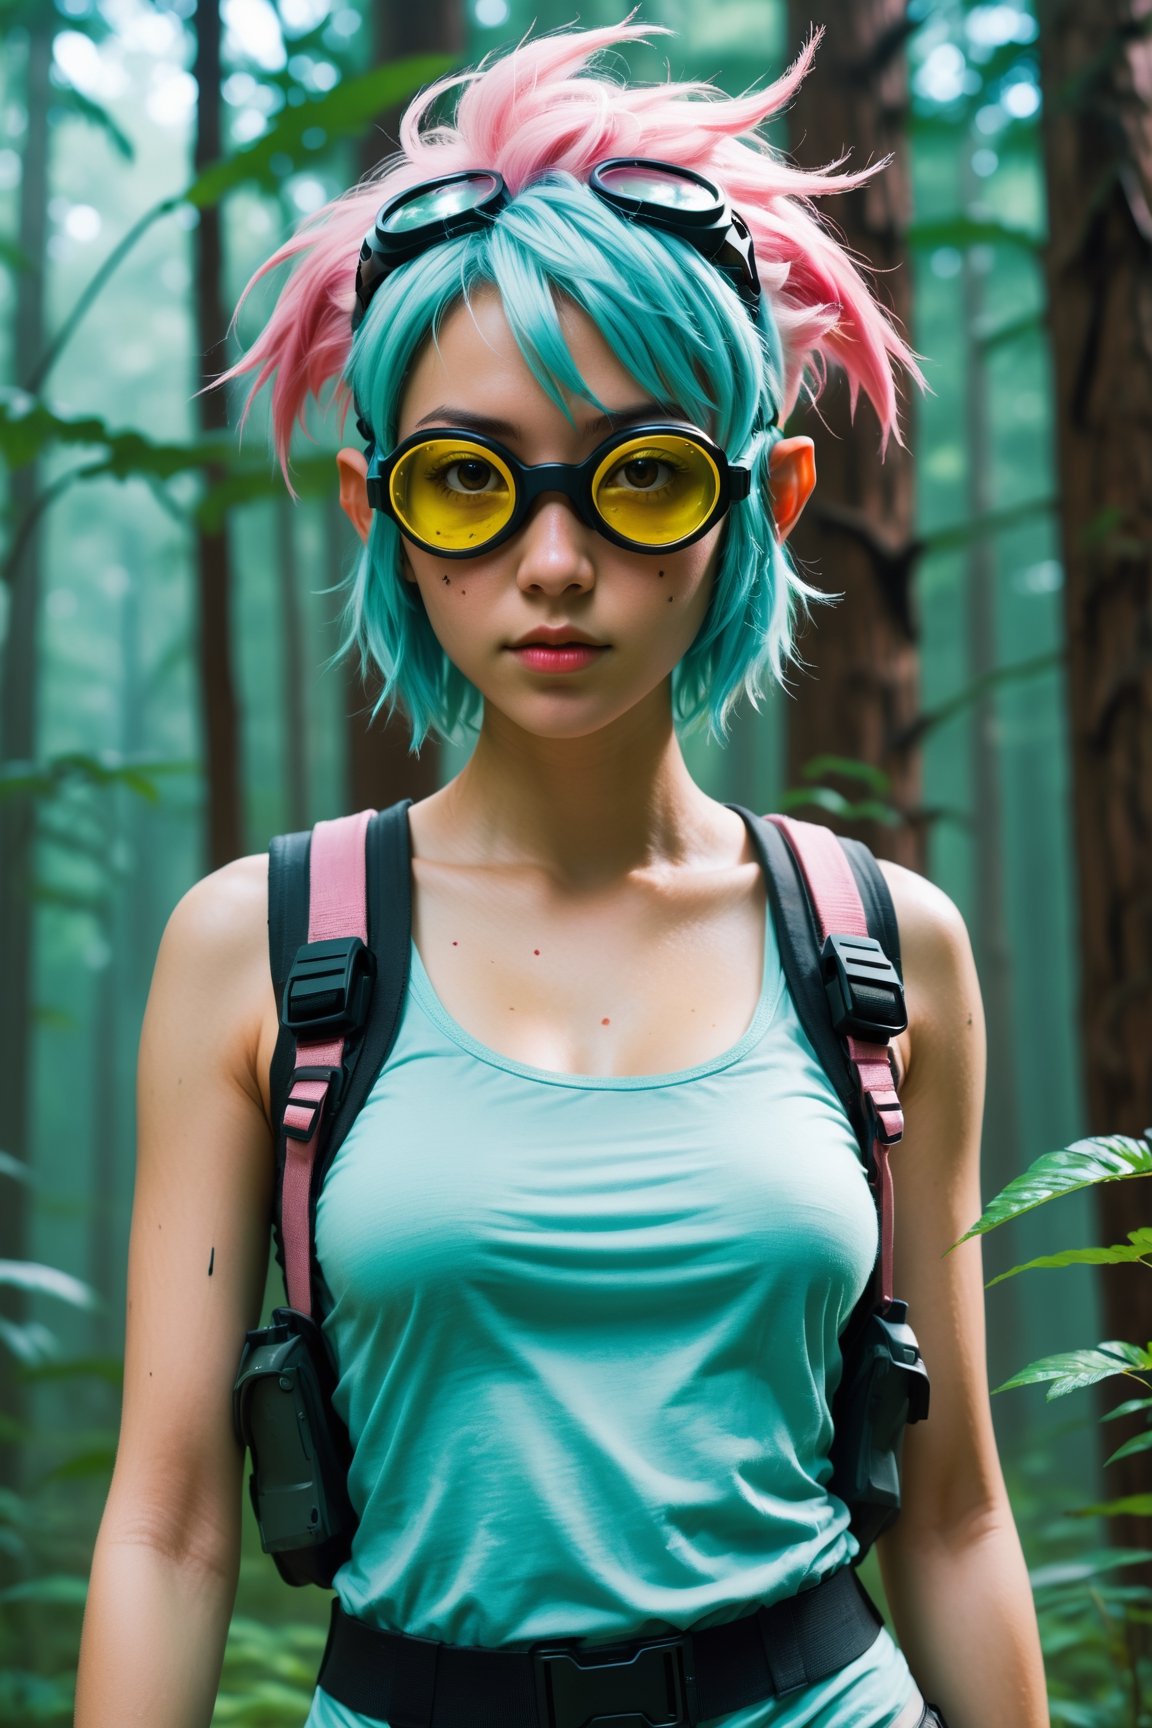  HONG KONG Girl ((September Ai)) , Pink AQUA Yellow  short messy hair, 

Sci-Fi RPG Character, close-up Full-body character portrait, Tank-Girl, small elf ears, legs, messy dyed hair, intricate clothes, goggles on top of her head, forest background, art by Jamie Hewlett and Ilya Kuvshinov, pipe.safety_checker = lambda images, clip_input: (images, False), sooyaaa,minsi
